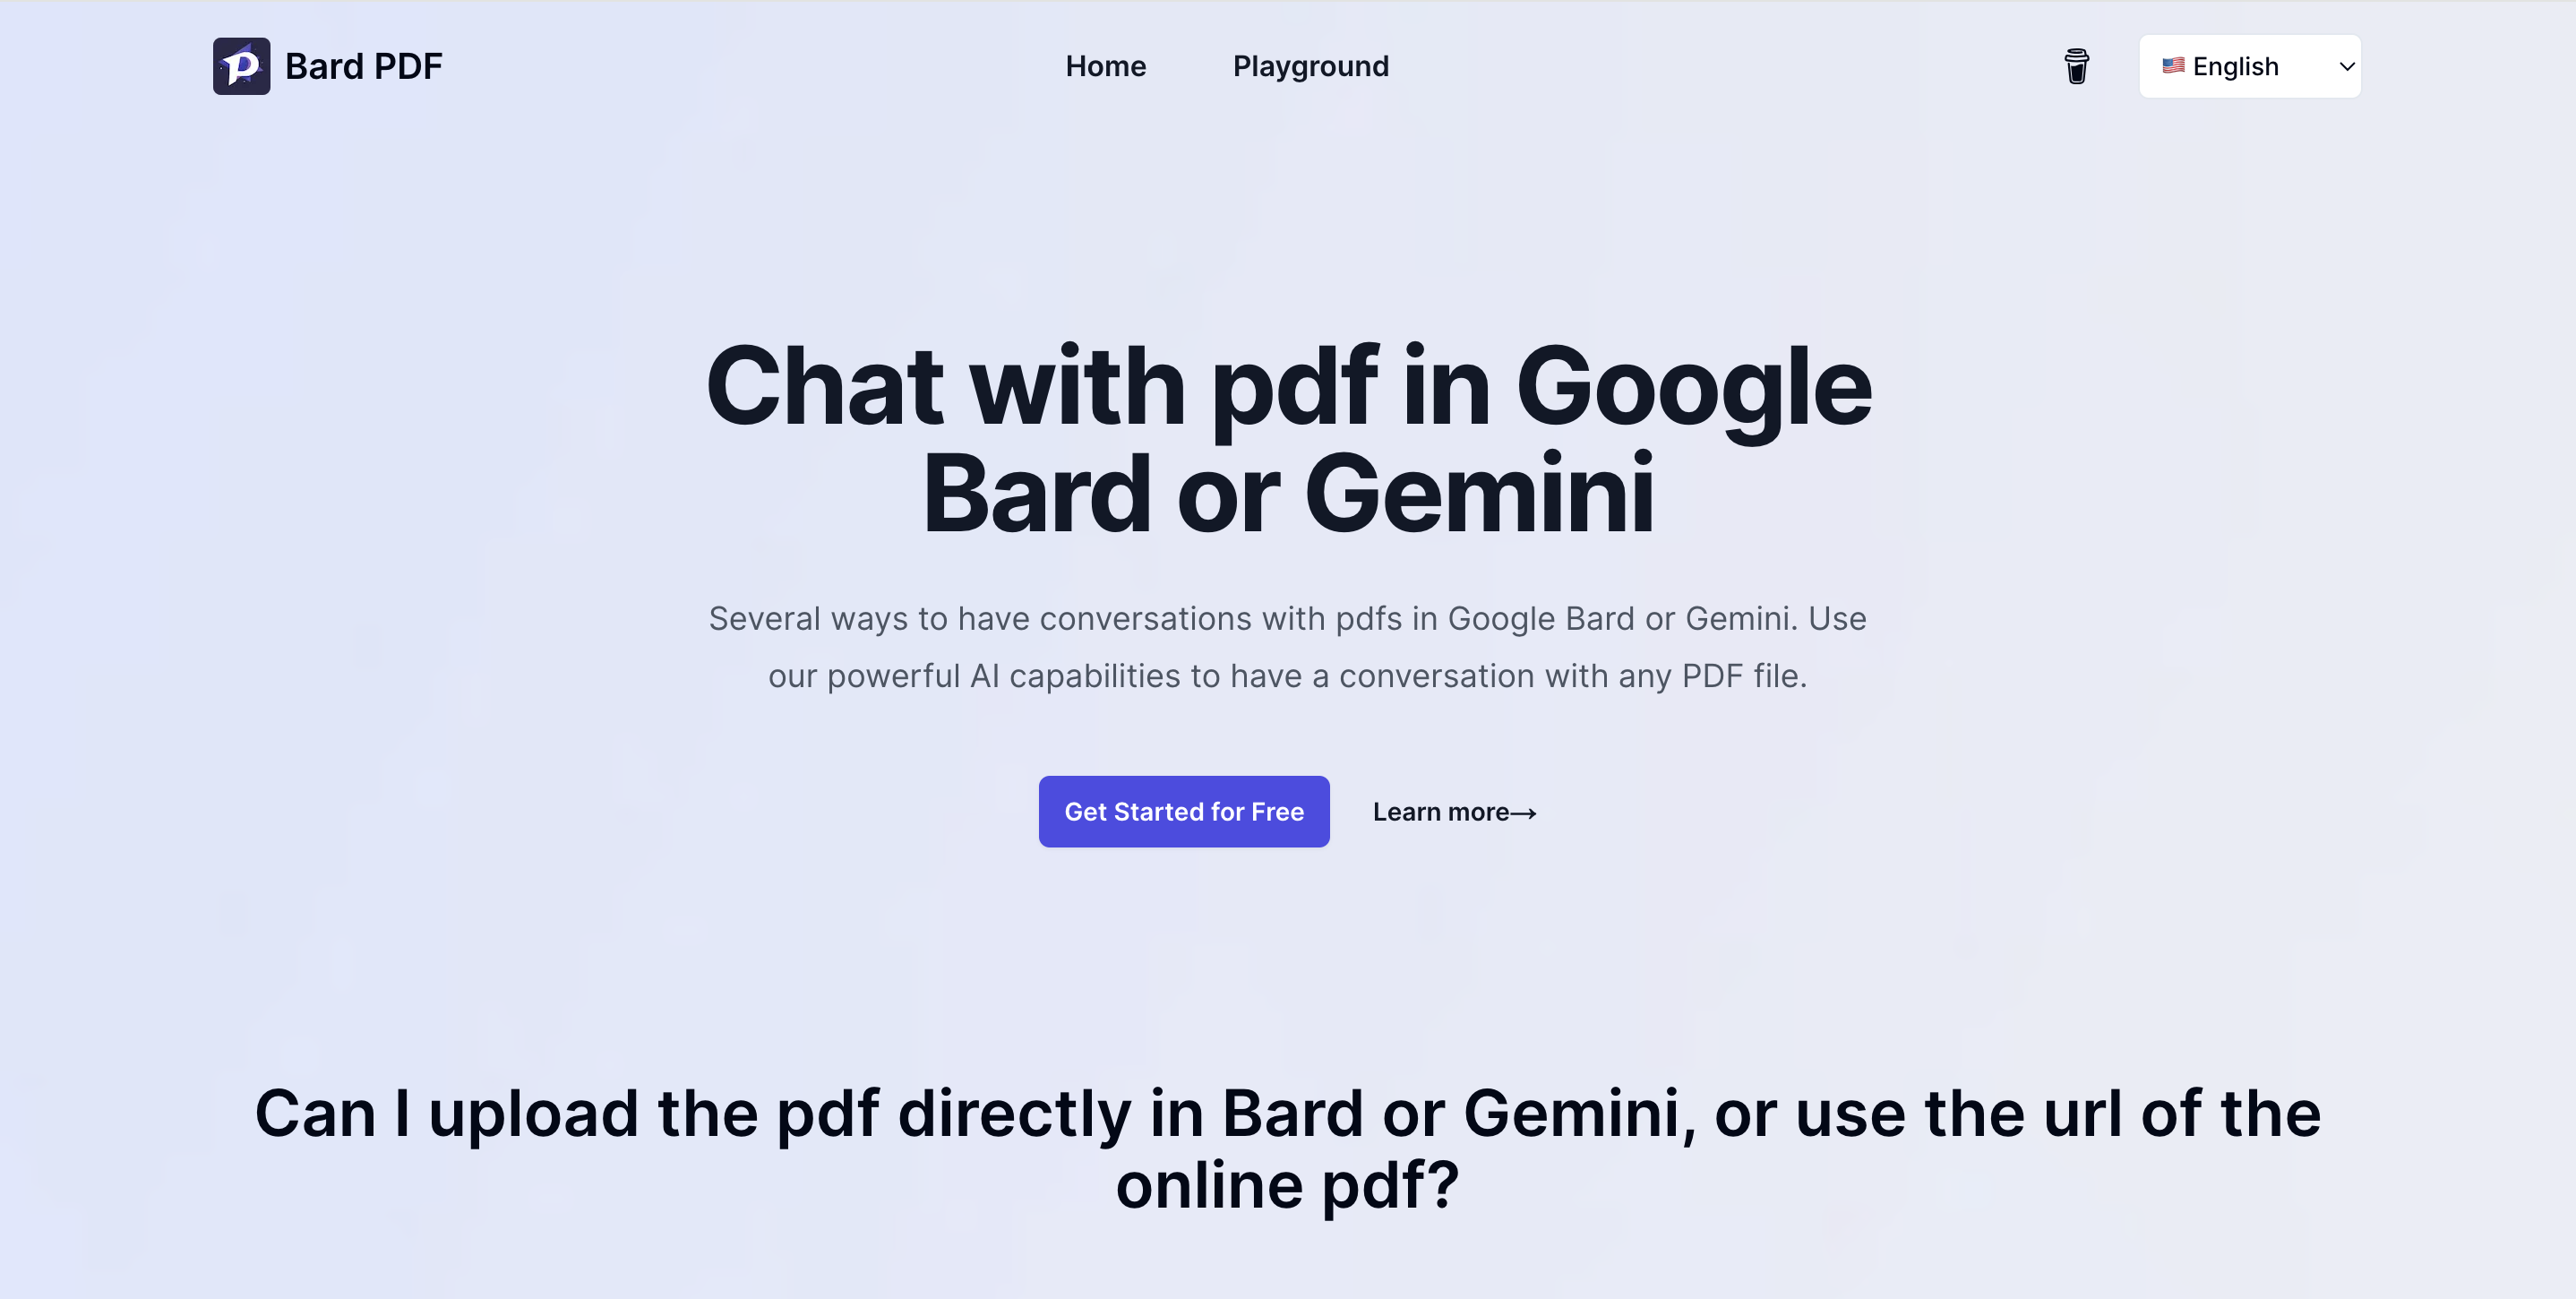 Several ways to have conversations with pdfs in Google Bard or Gemini. Use our powerful AI capabilities to have a conversation with any PDF file. Just